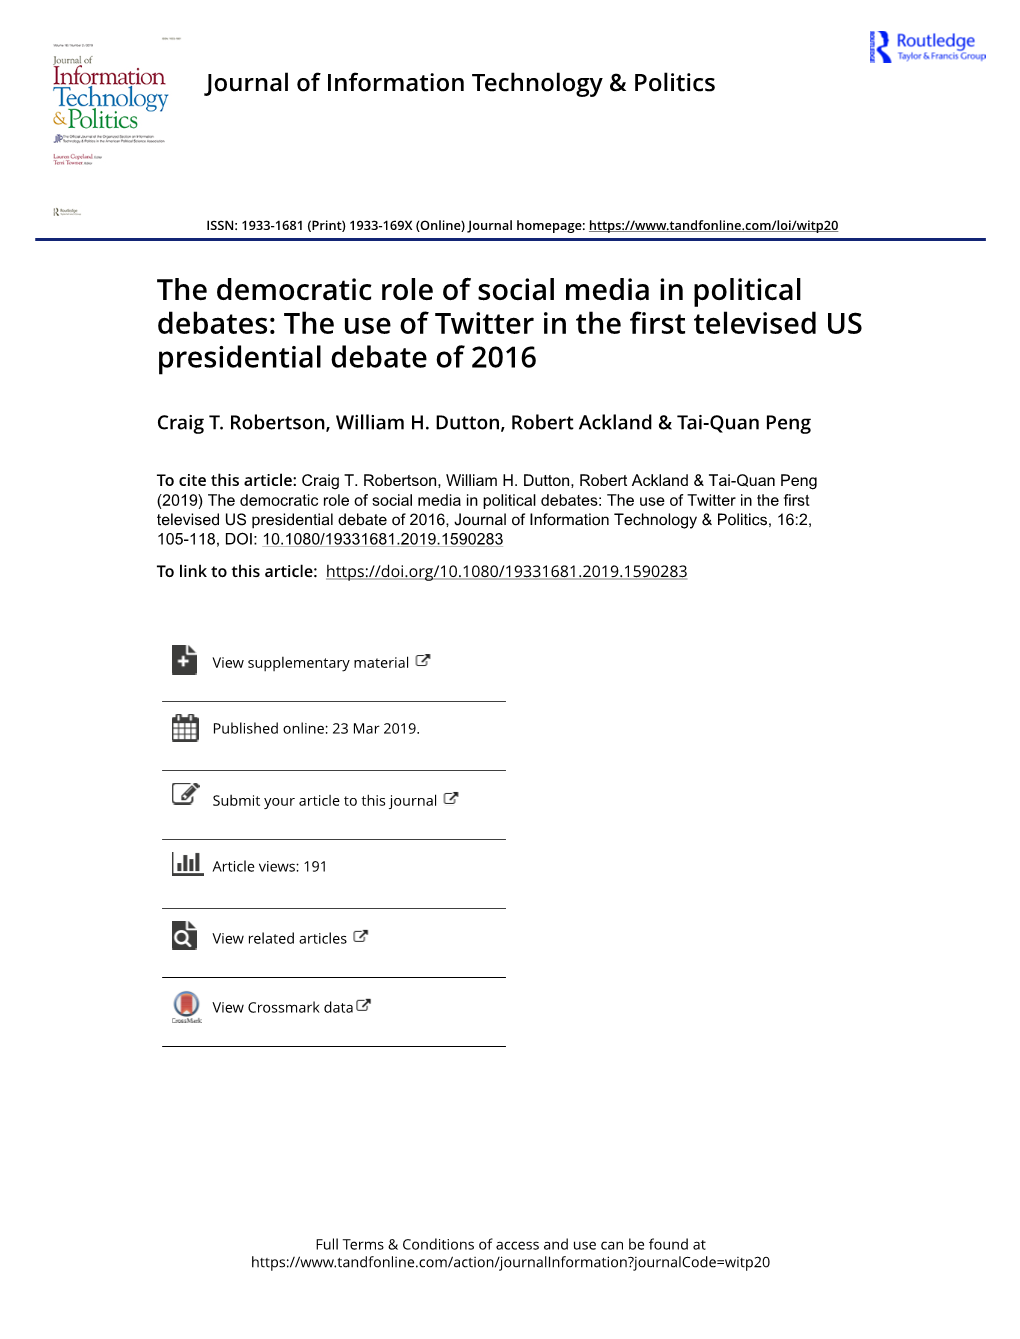 The Democratic Role of Social Media in Political Debates: the Use of Twitter in the First Televised US Presidential Debate of 2016